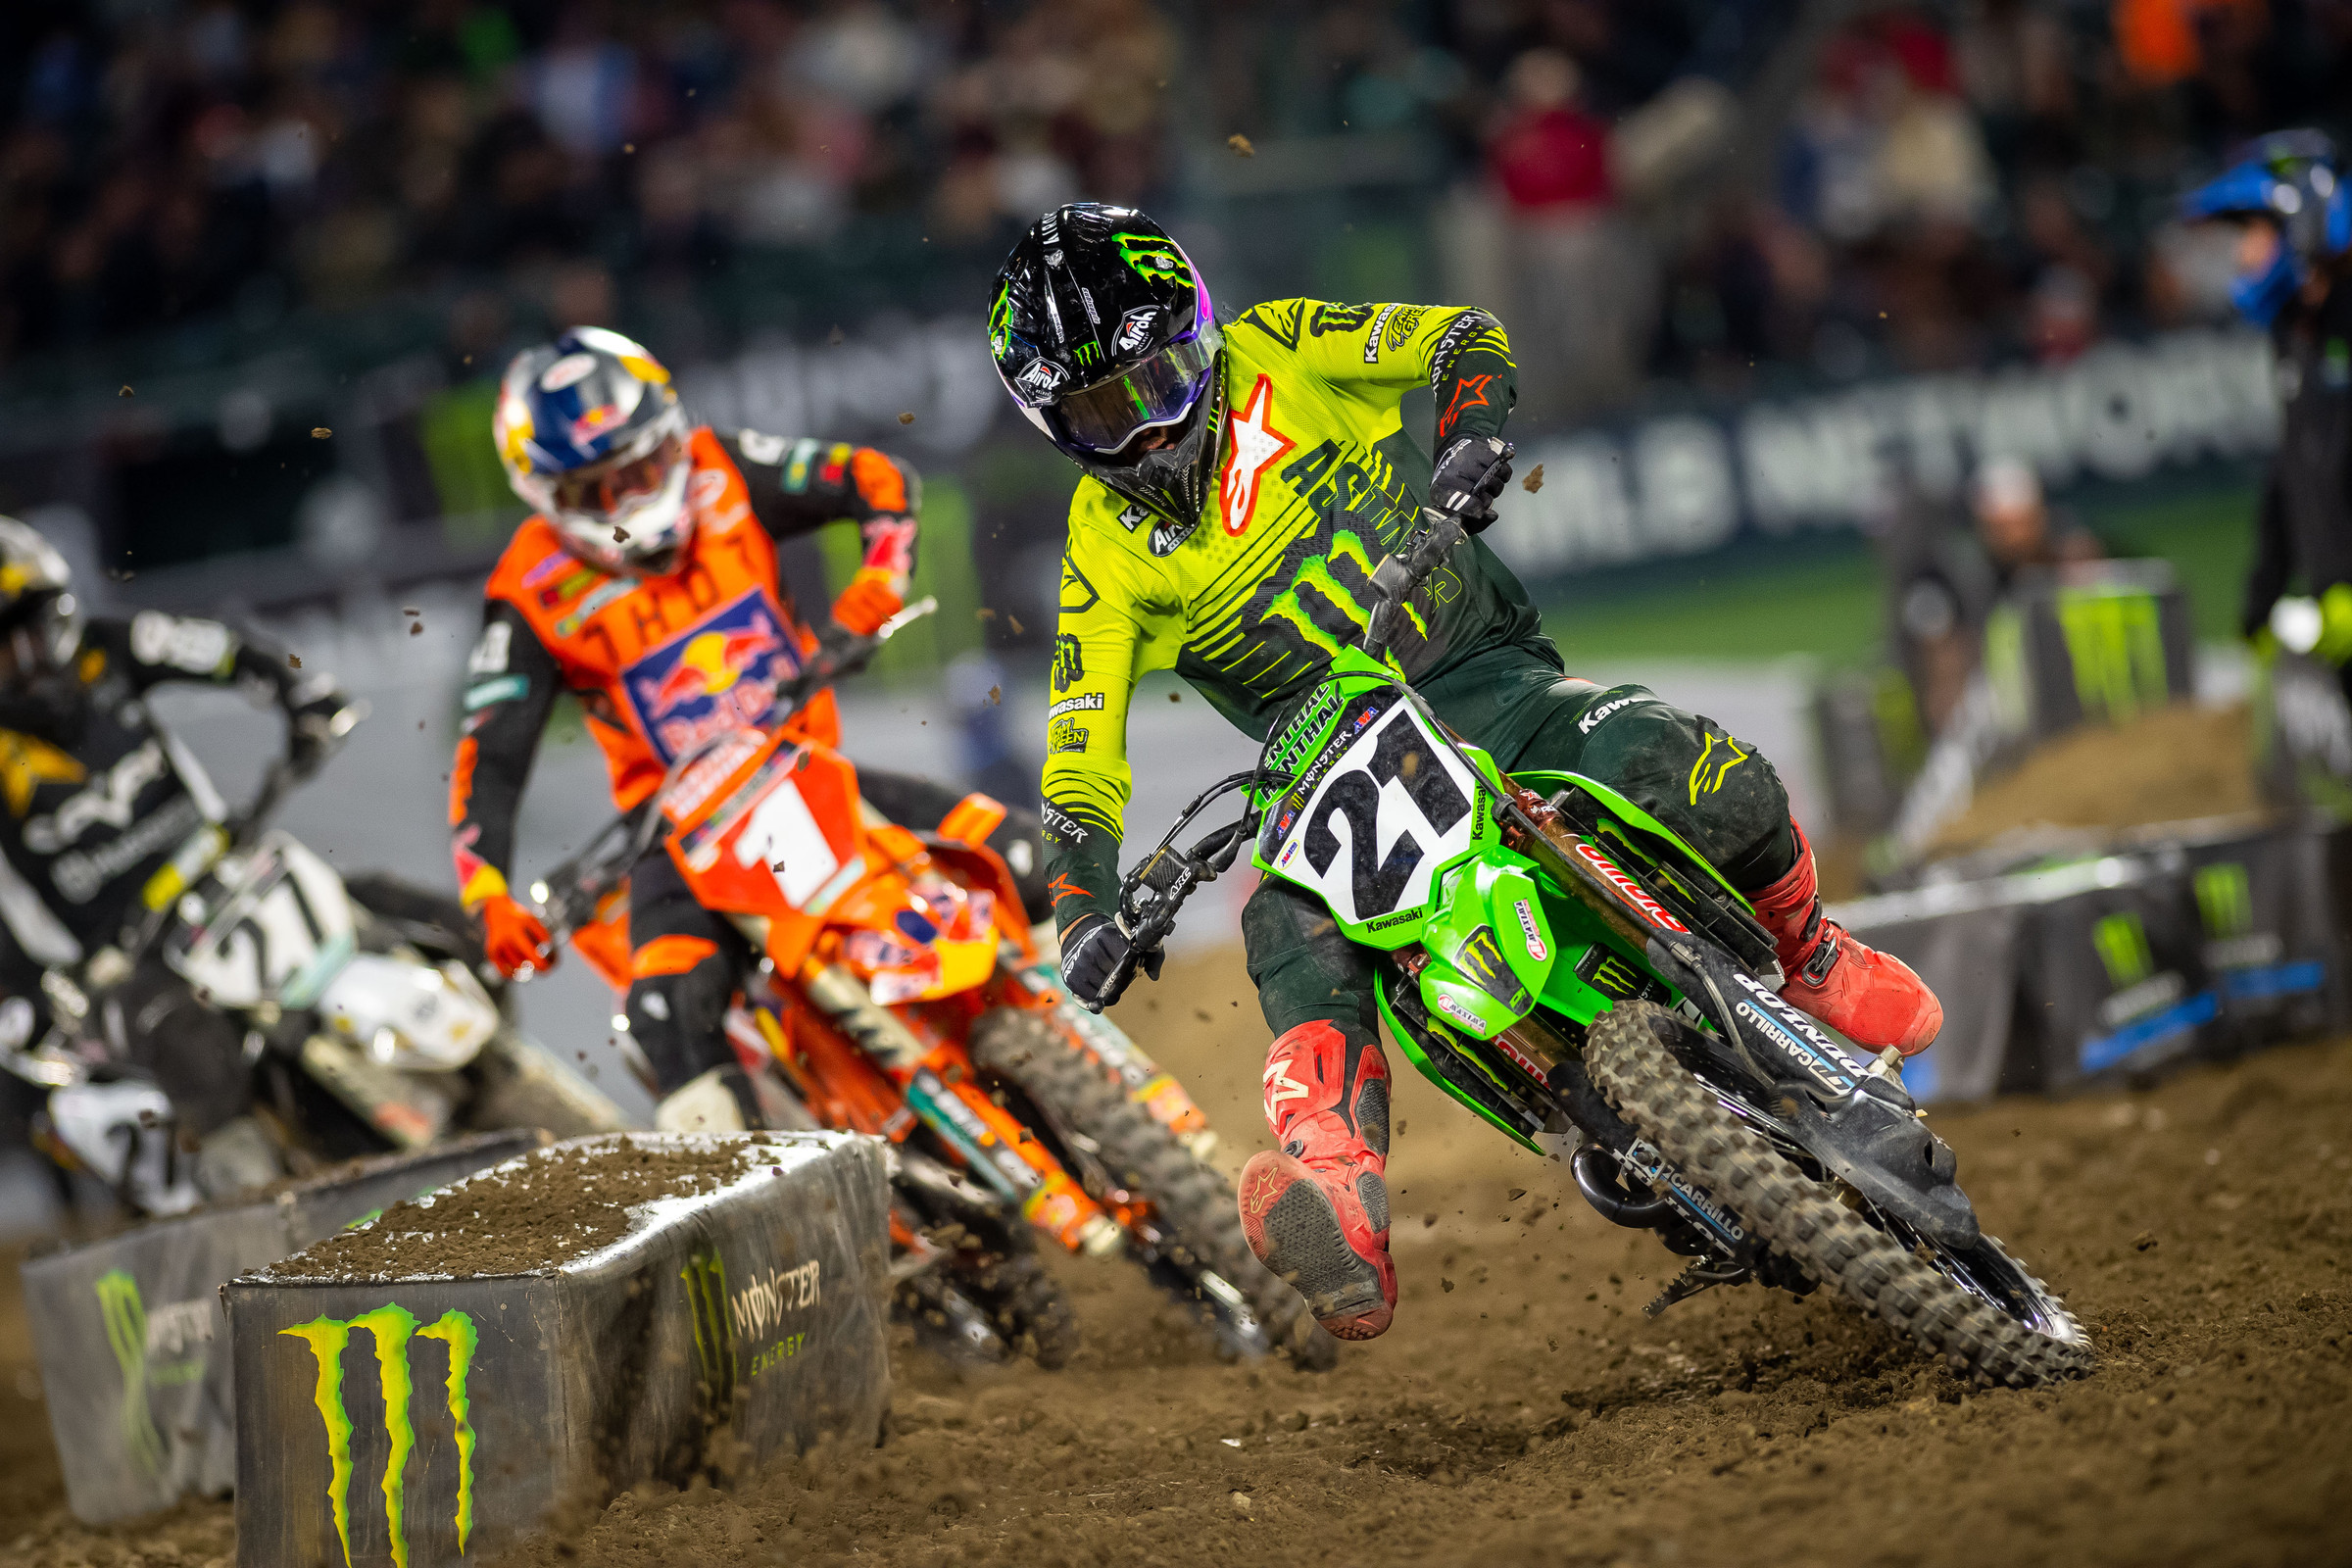 10 Things to Watch at 2022 Oakland Supercross